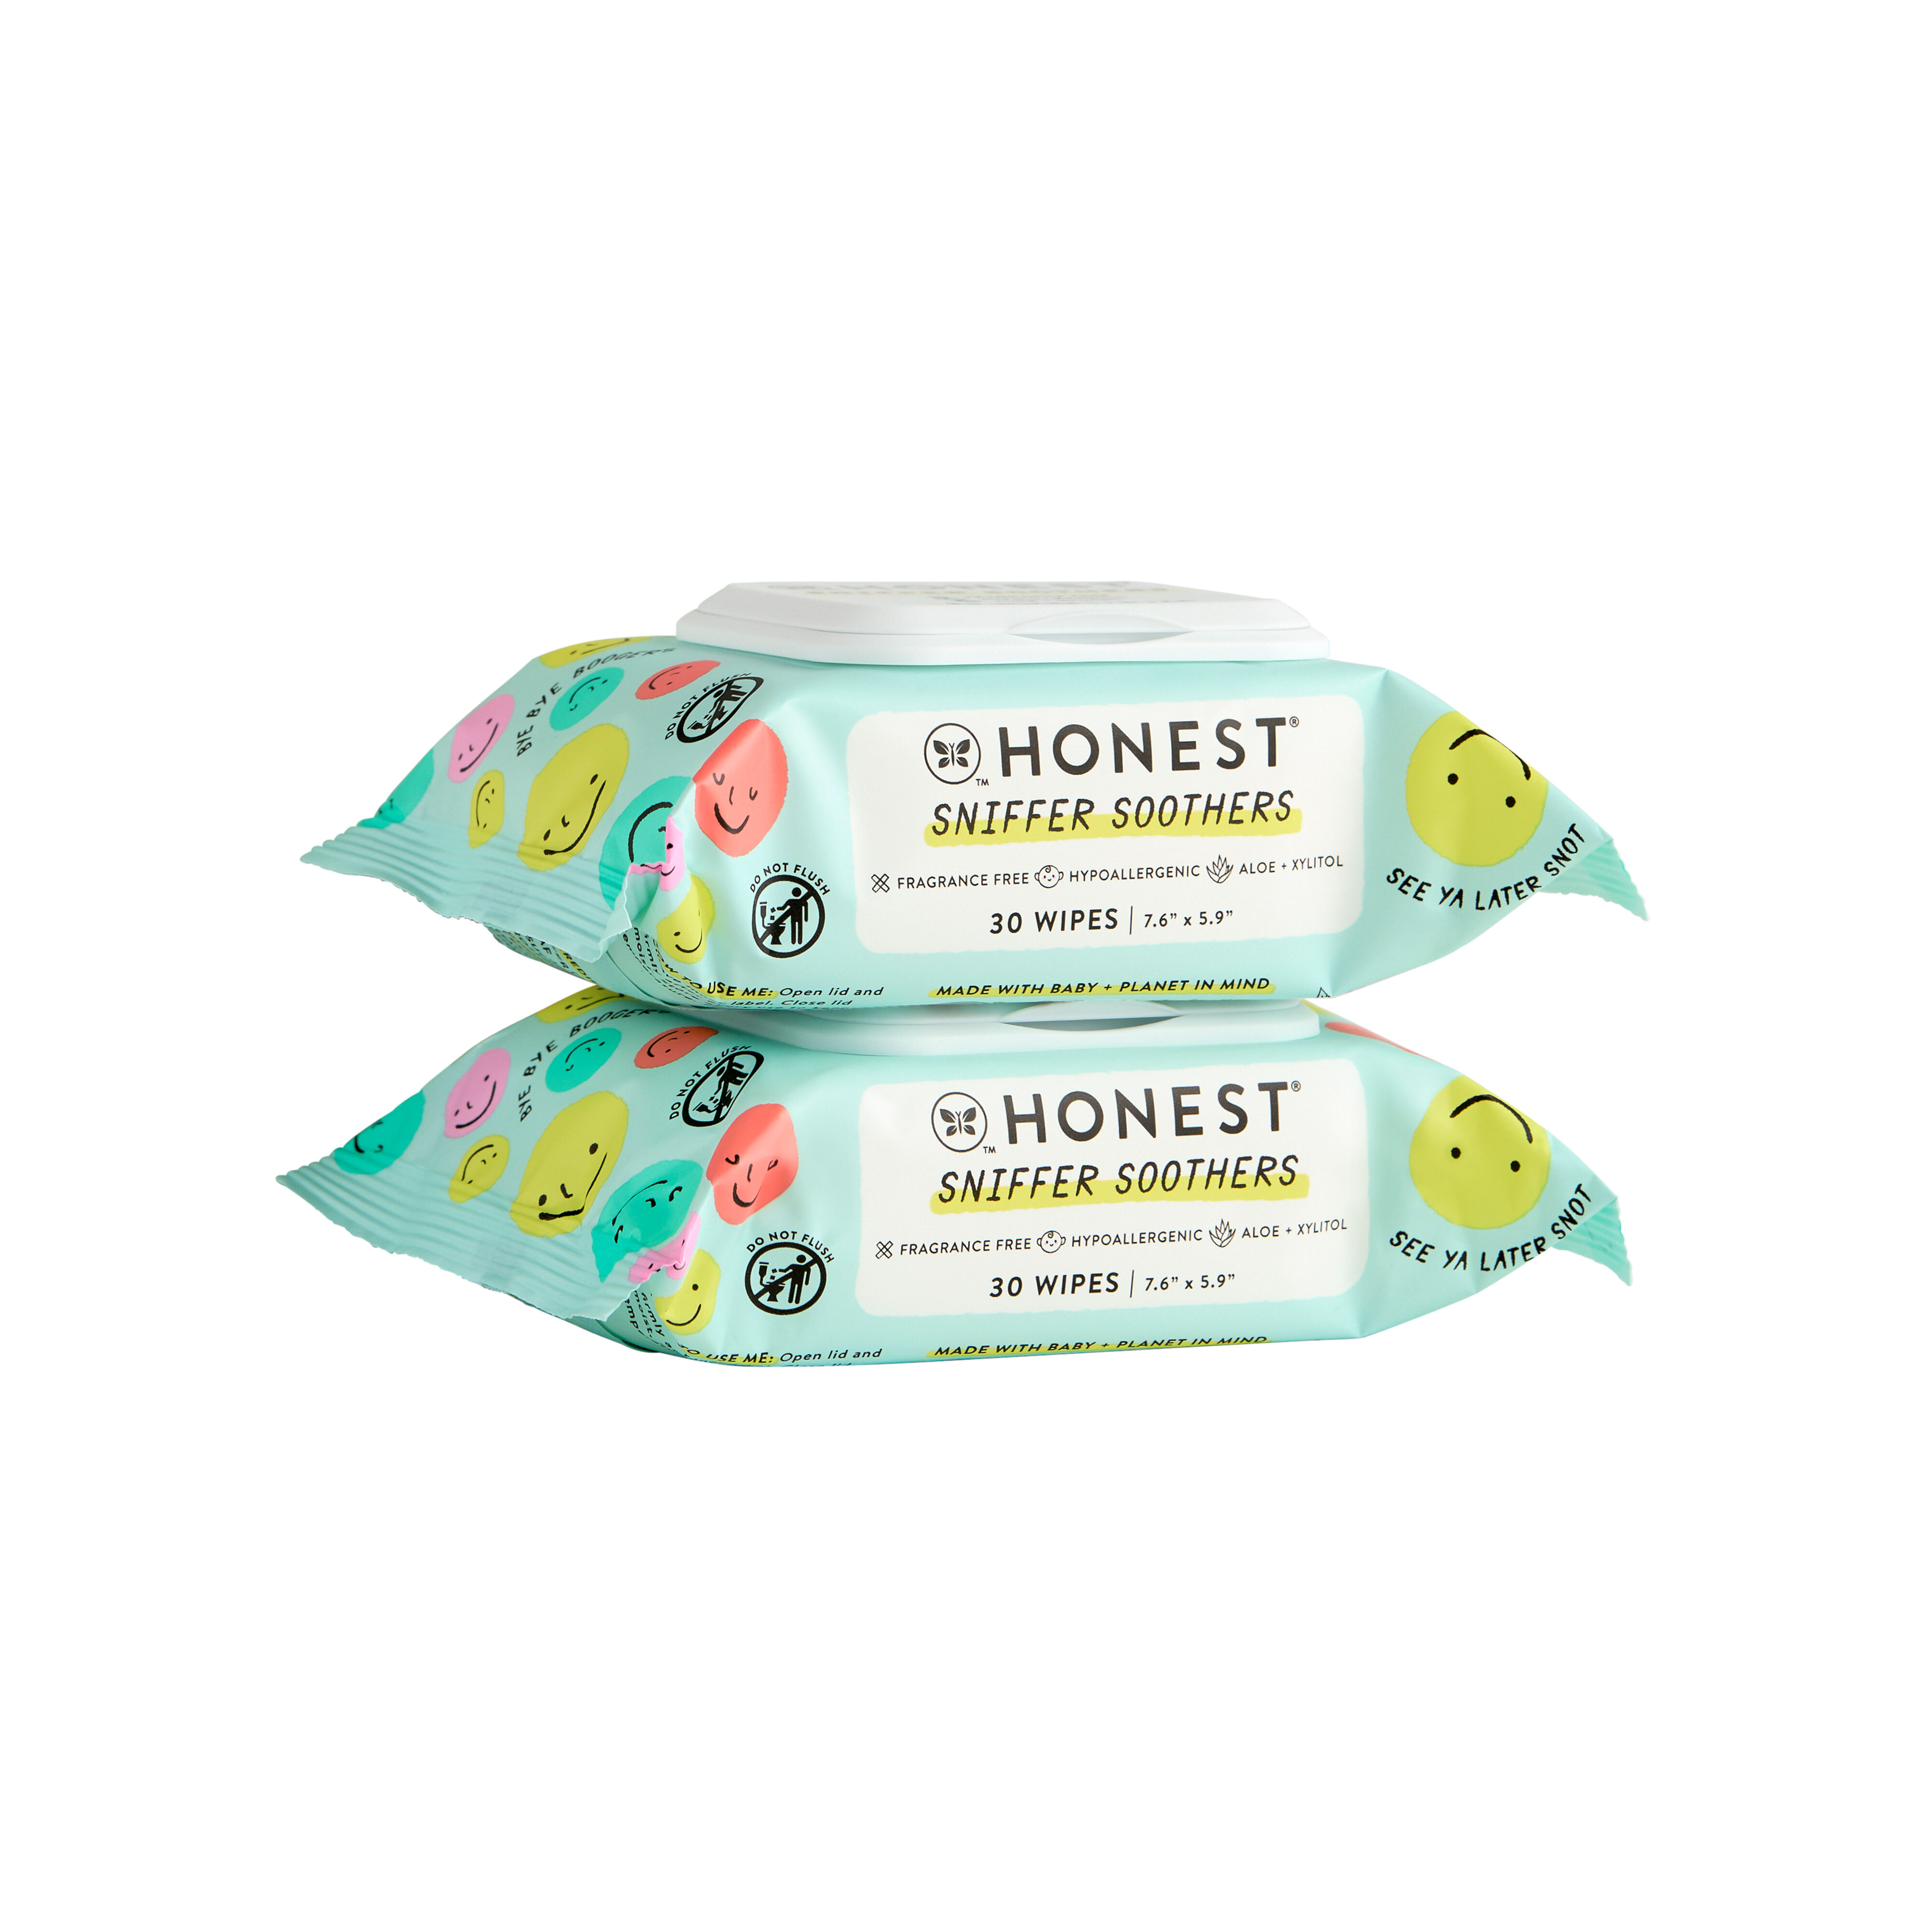 Sniffer Soothers Nose + Face Wipes, 60 Count